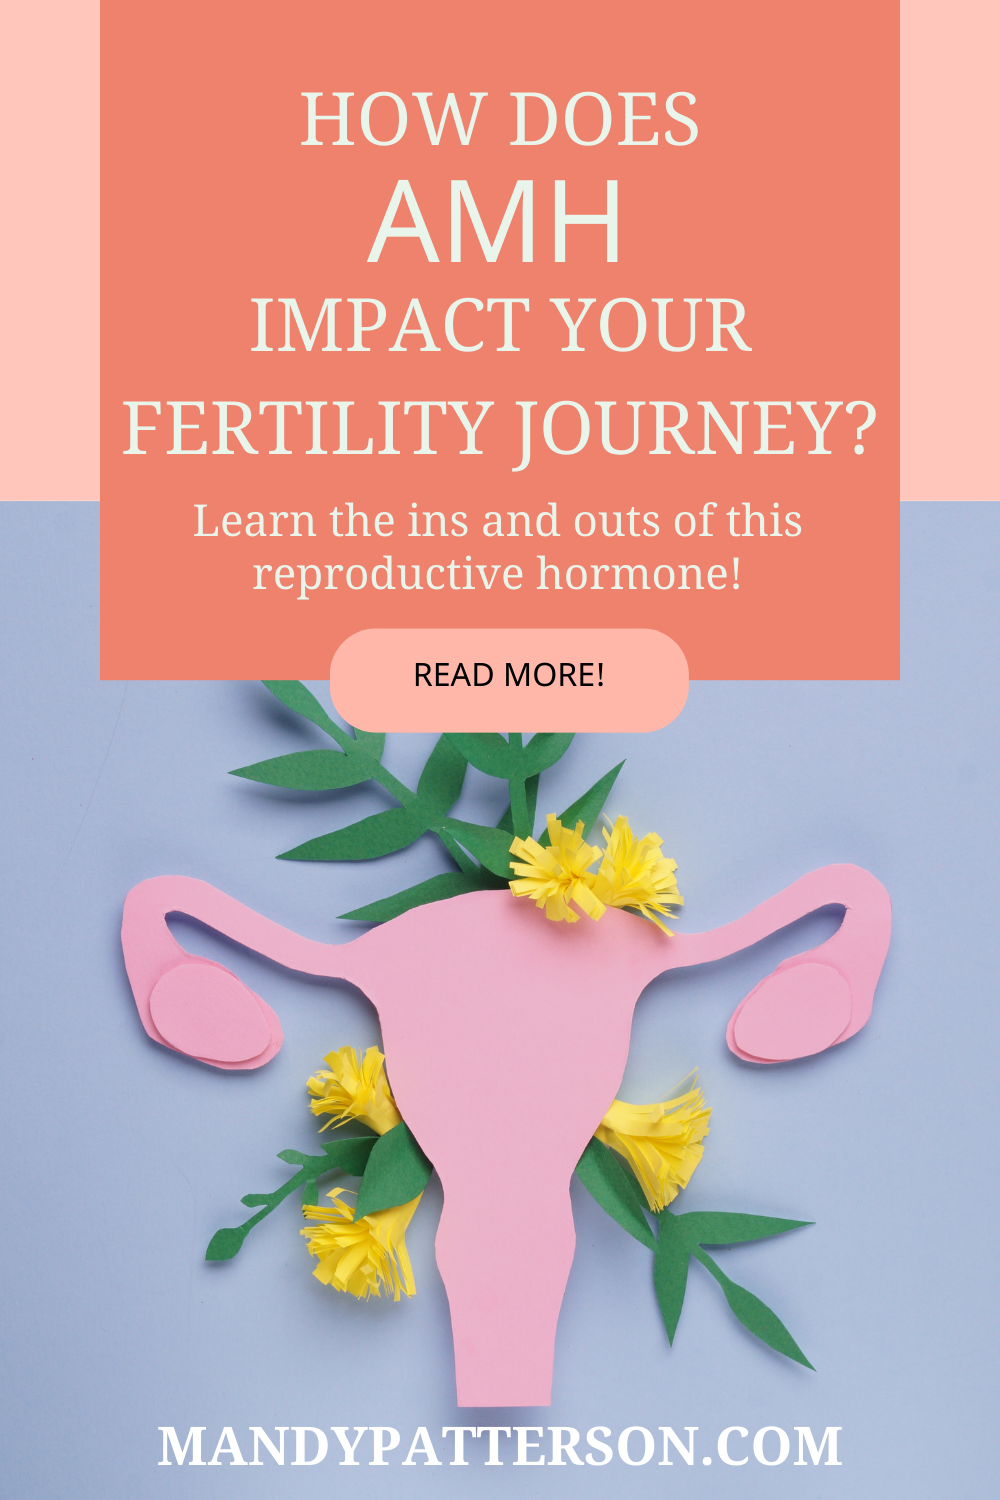 How Does AMH Impact Your Fertility Journey